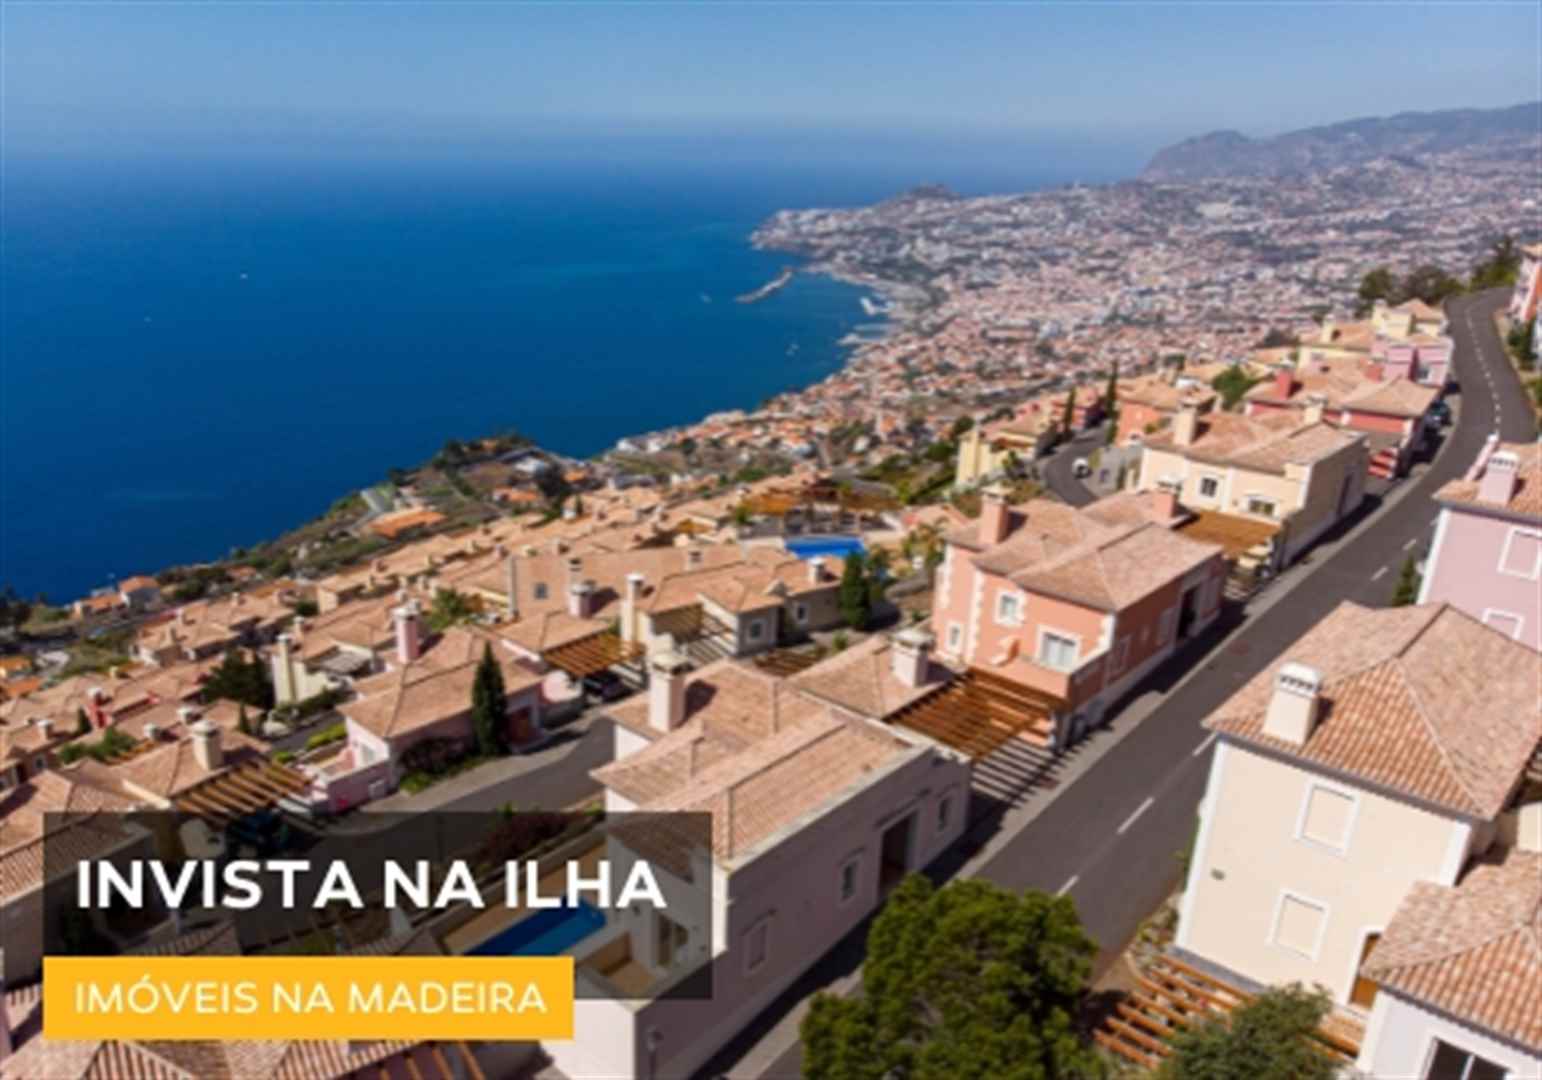 Invest in the Island | Properties in Madeira 